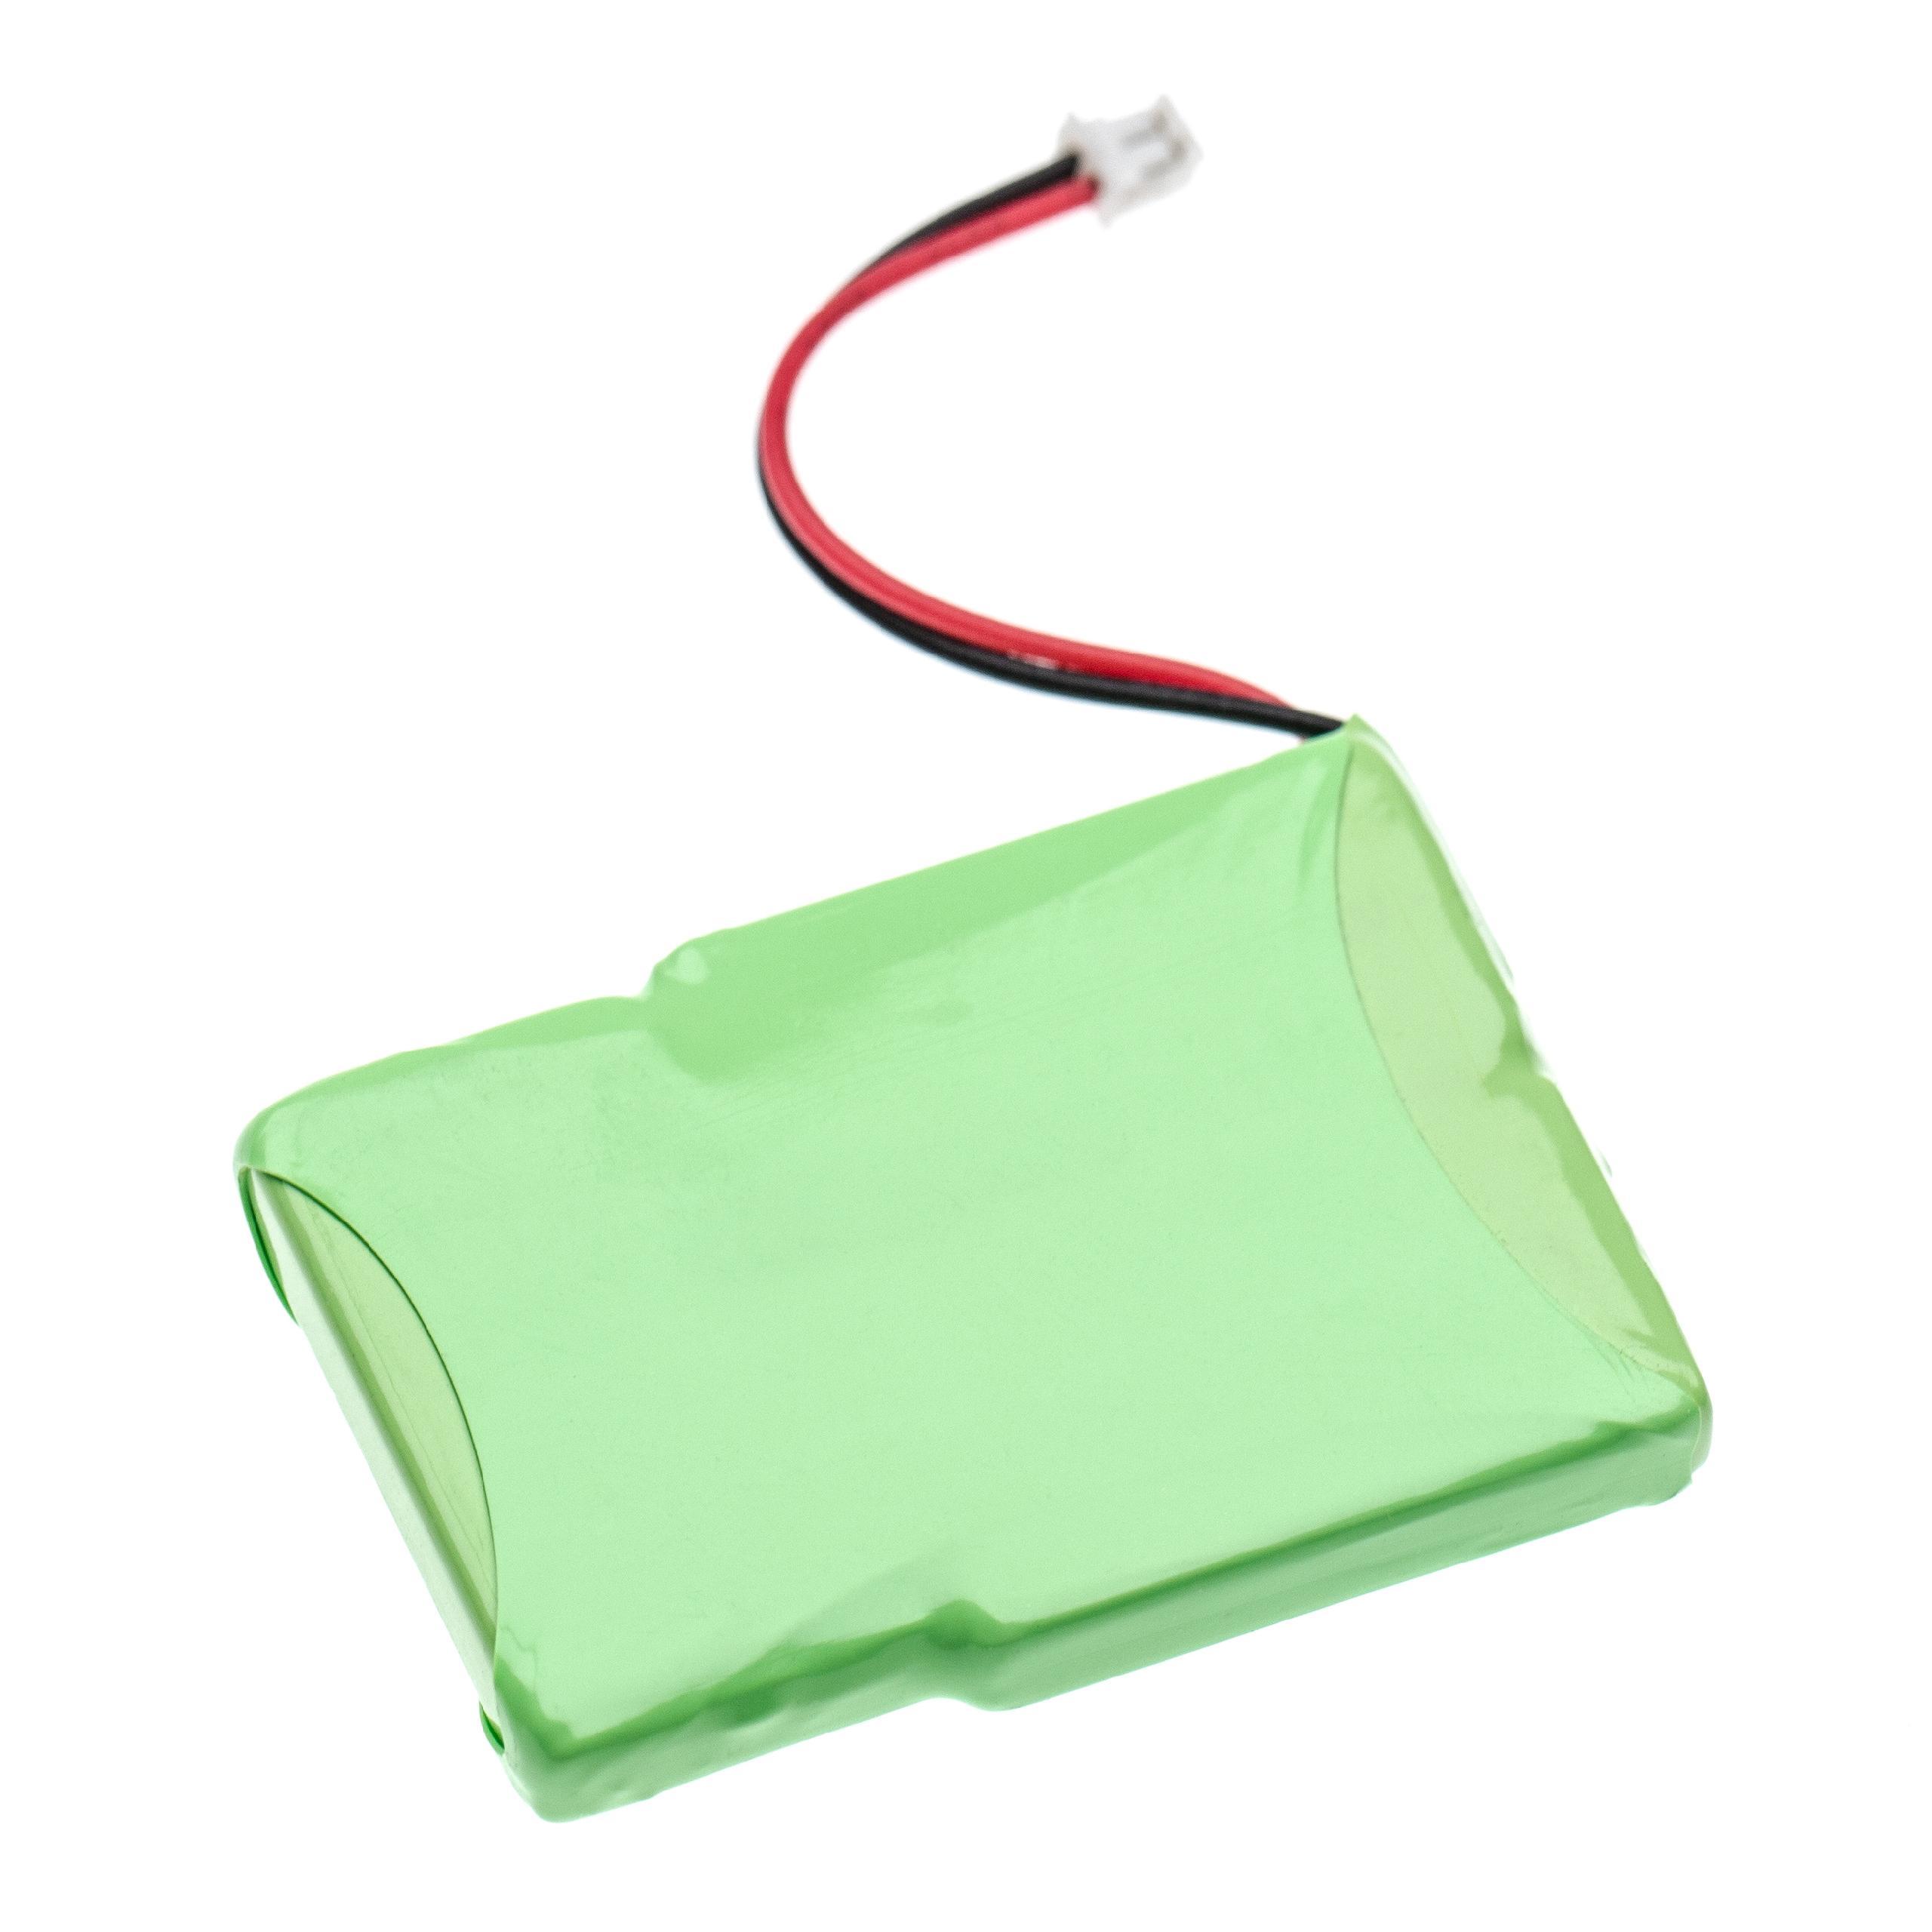 Landline Phone Battery Replacement for Agfeo McNairF6M3EMX, F6M3EMX - 400mAh 3.6V NiMH